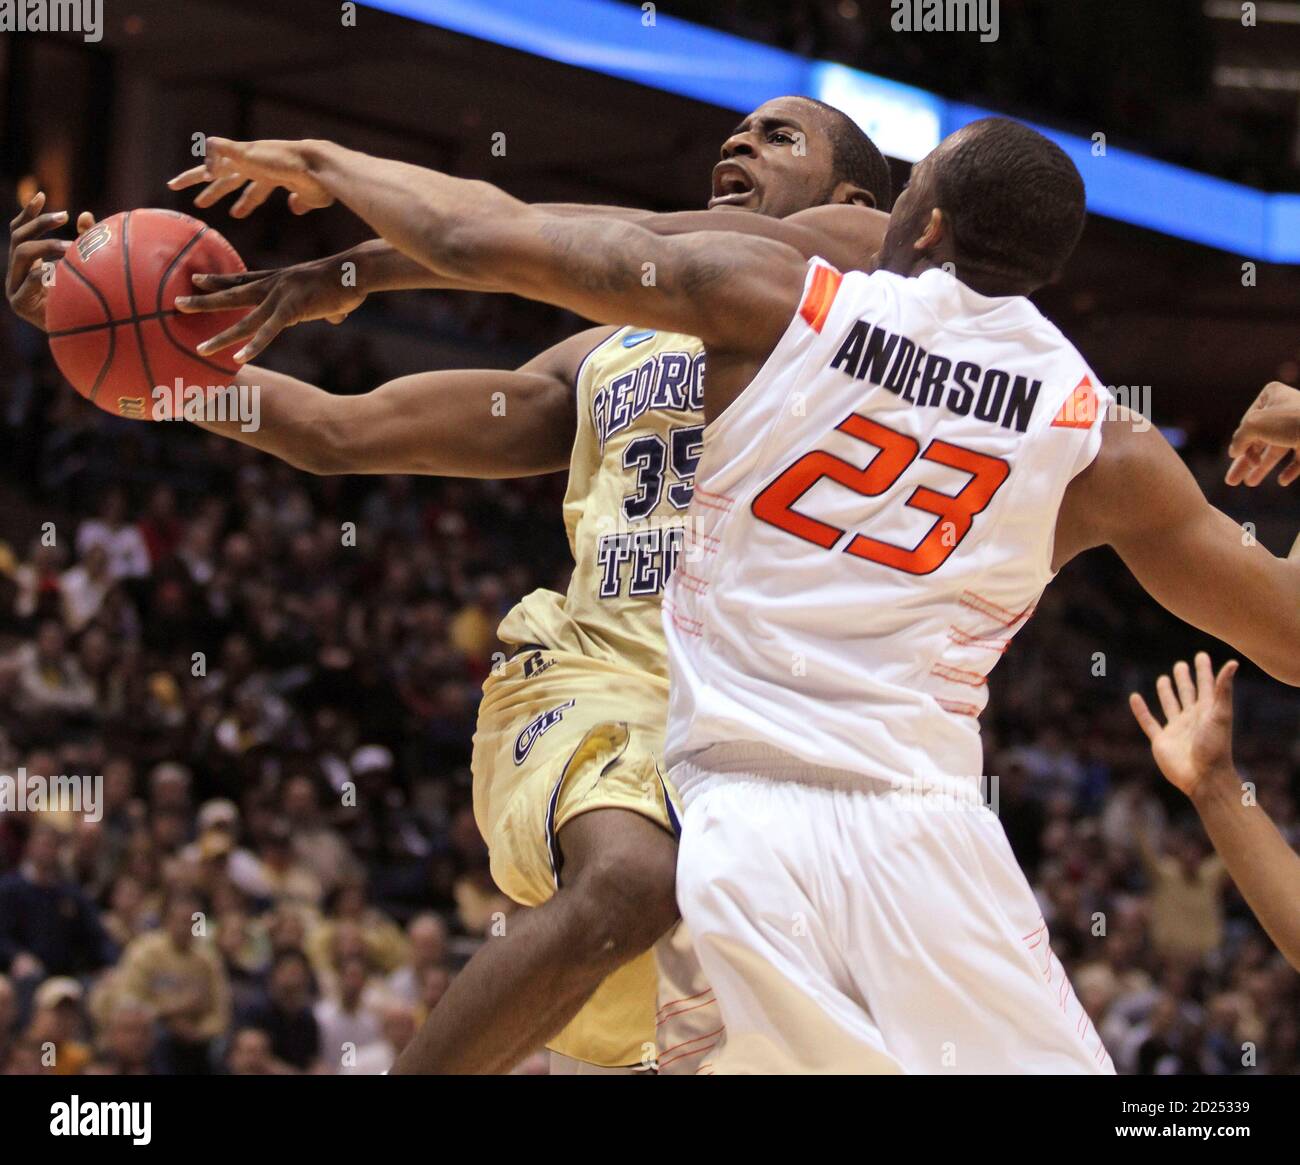 Georgia Tech forward Zachery Peacock is fouled by Oklahoma State guard  James Anderson (R) as he attempts to shoot in the first half of their NCAA  Division I Men's Basketball Tournament game